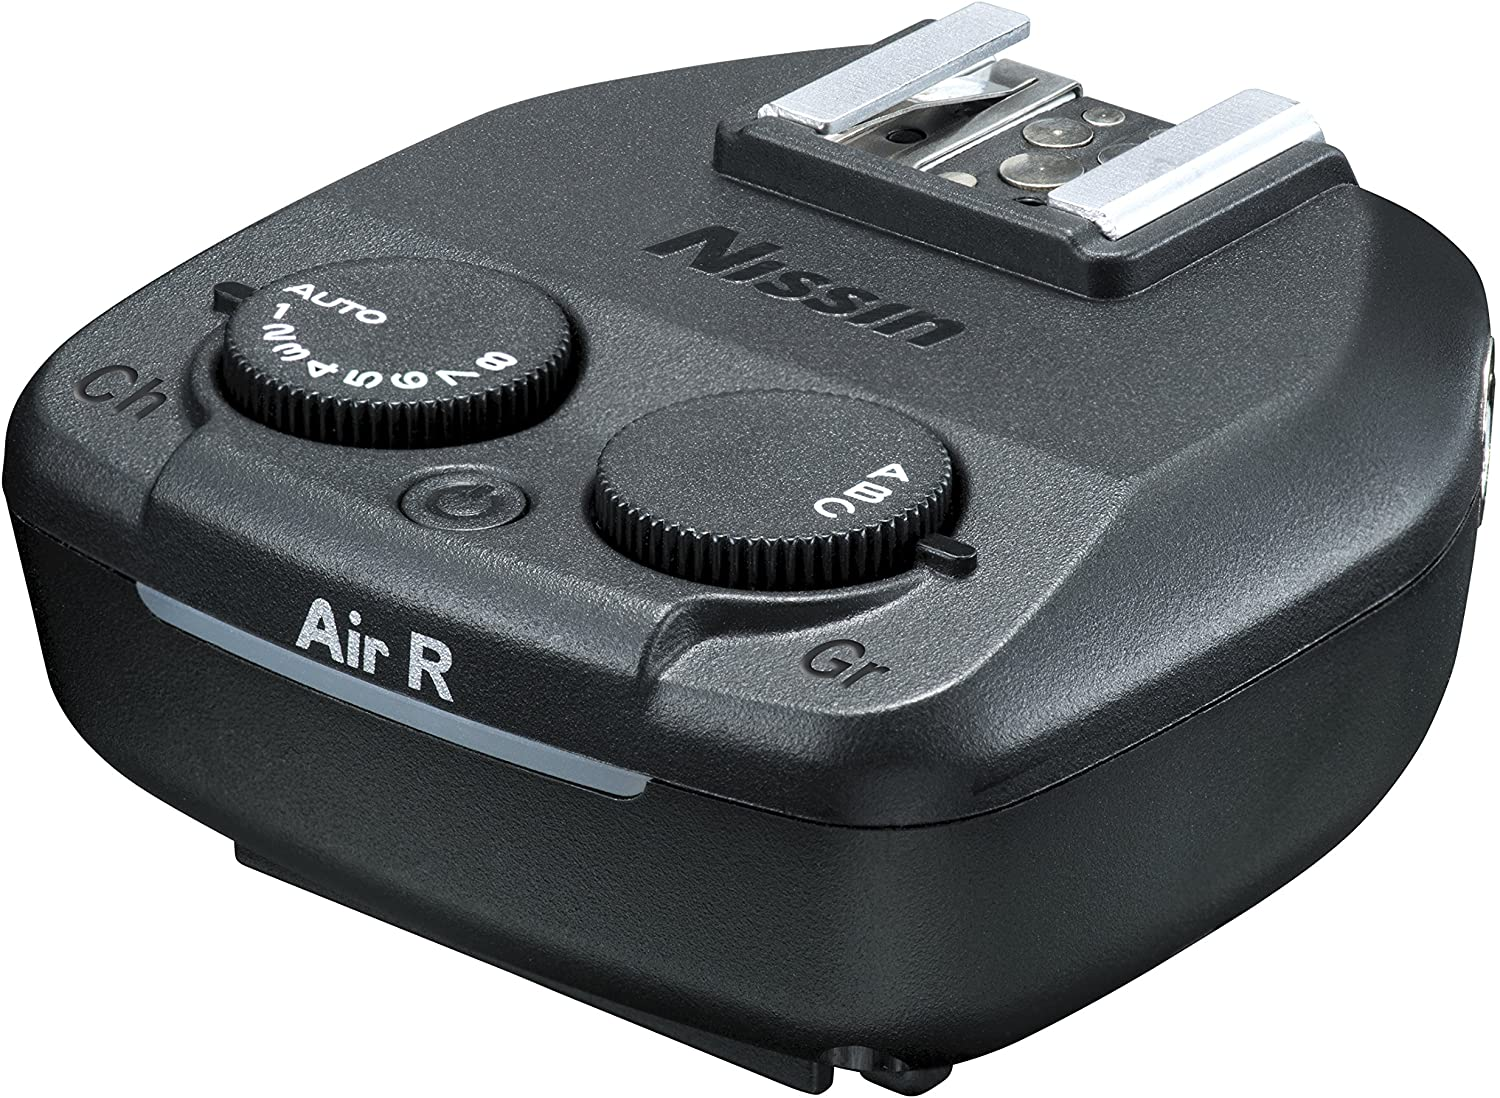 Nissin Air R Receiver for Sony Flashes  with Multi Interface Shoe